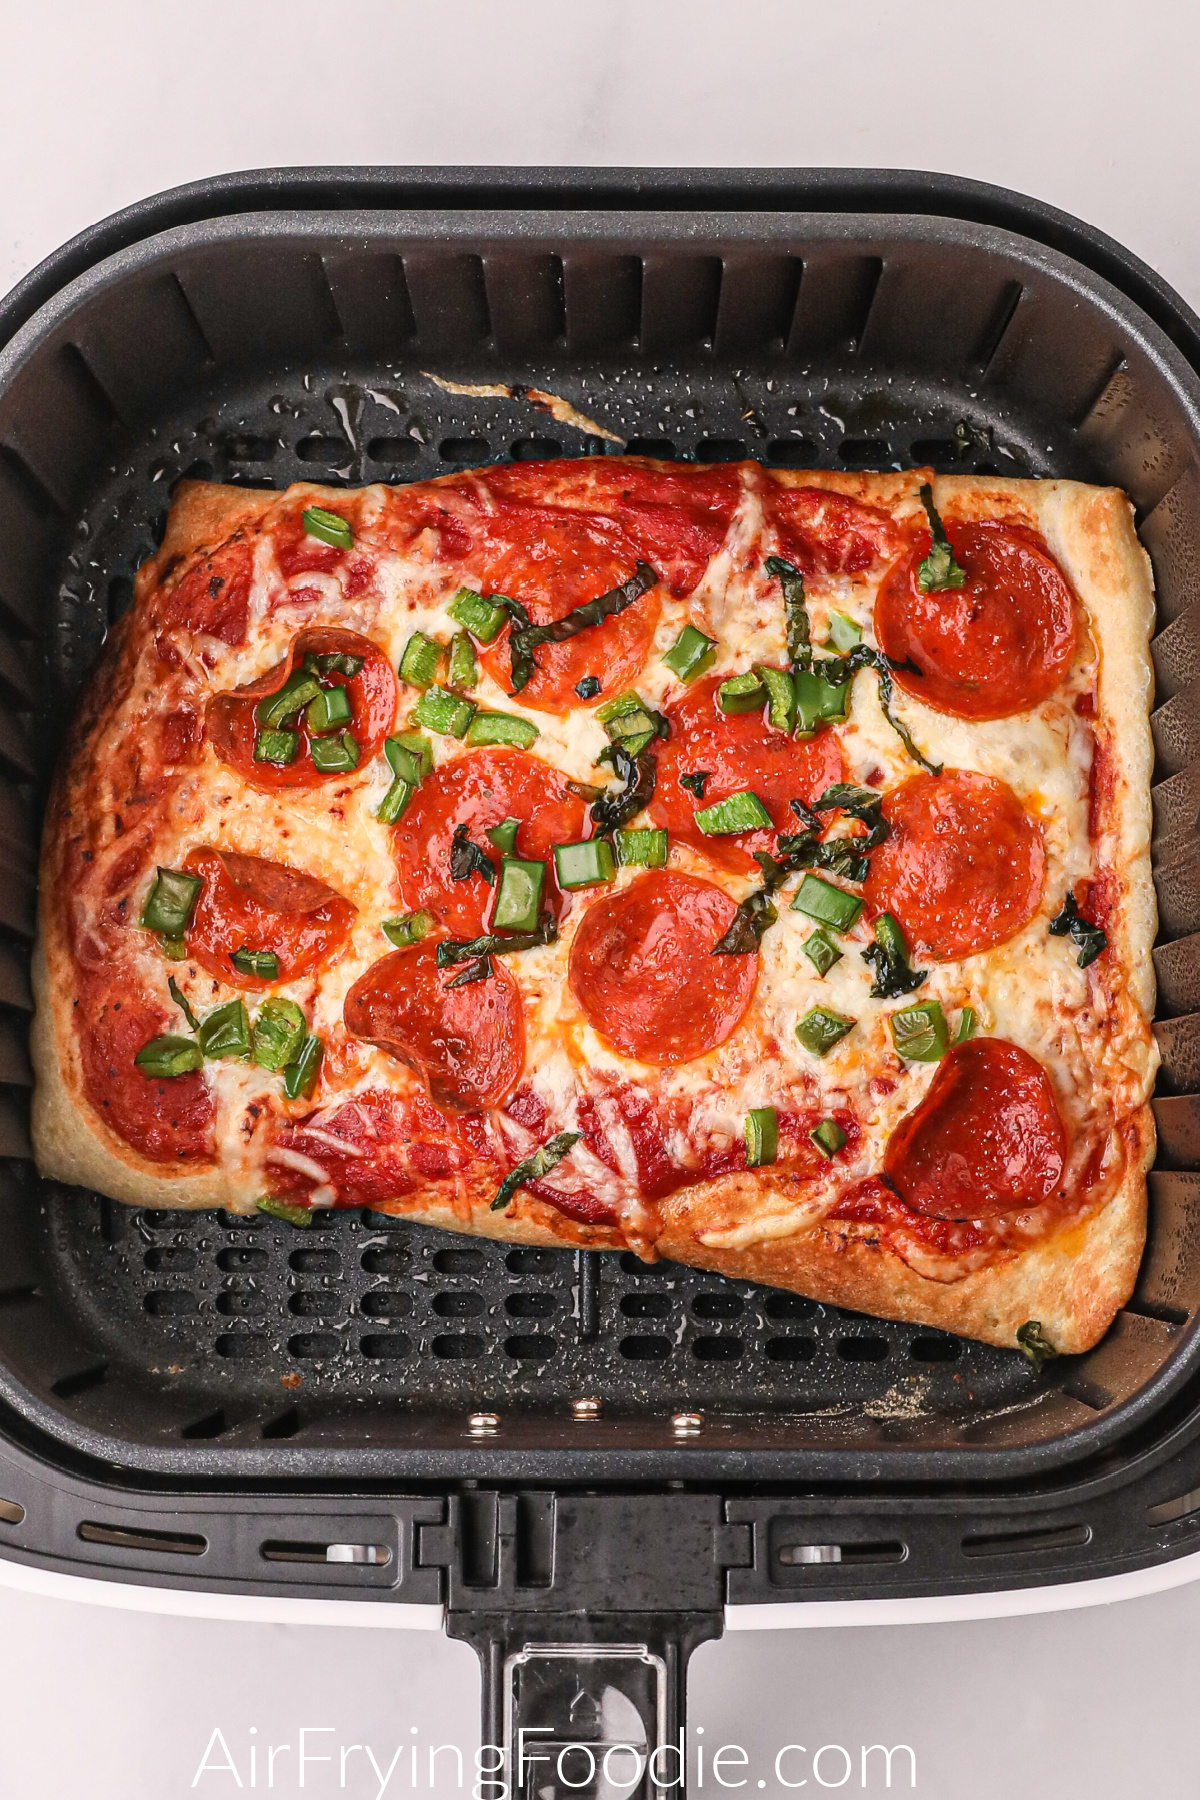 Fully cooked pizza in the basket of the air fryer, ready to serve.